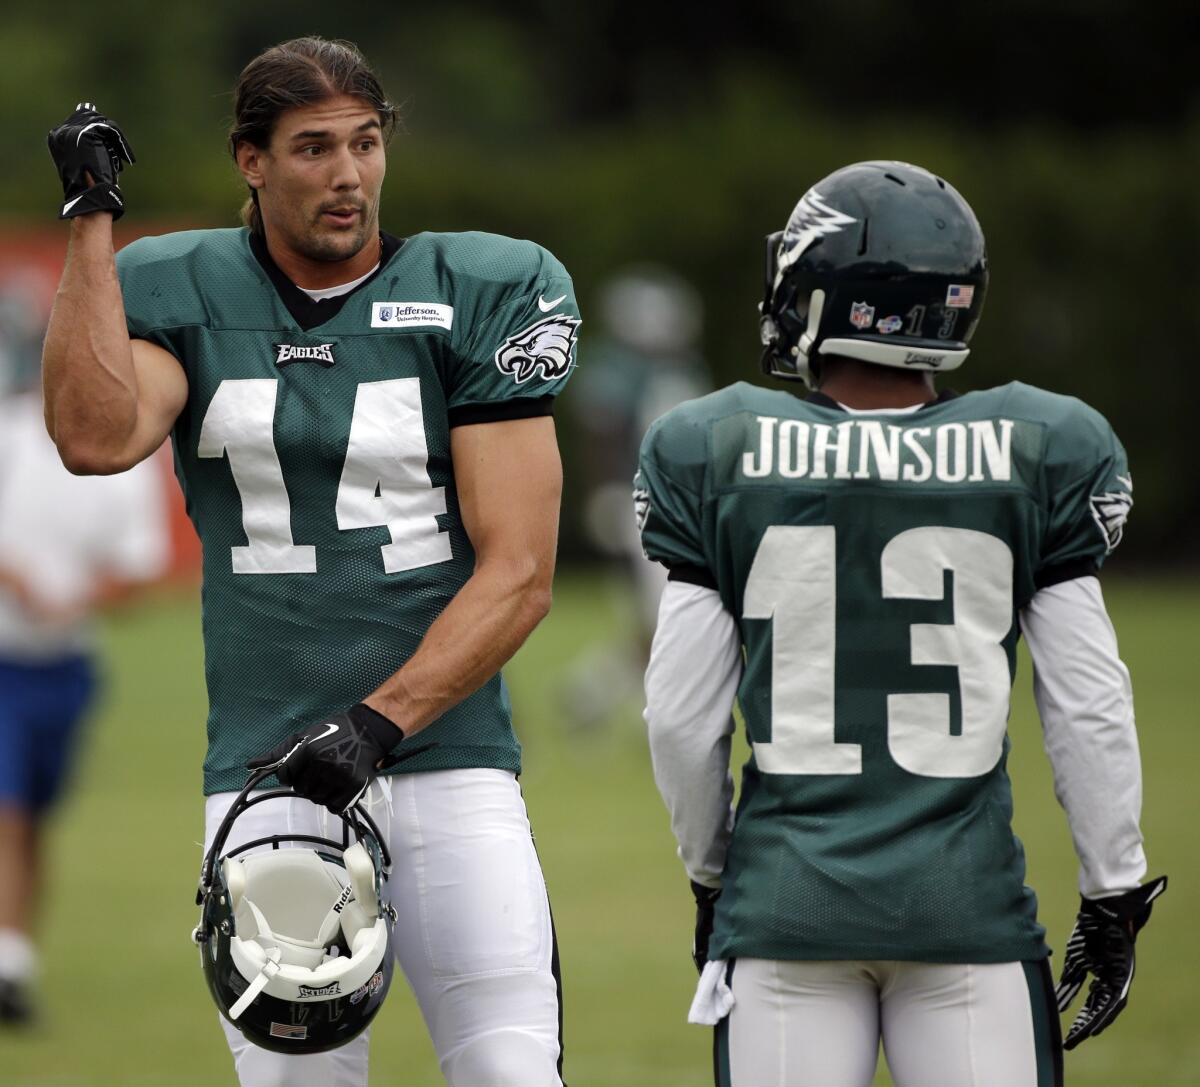 Philadelphia Eagles wide receivers Riley Cooper, left, and Damaris Johnson talk during a training camp session Tuesday.